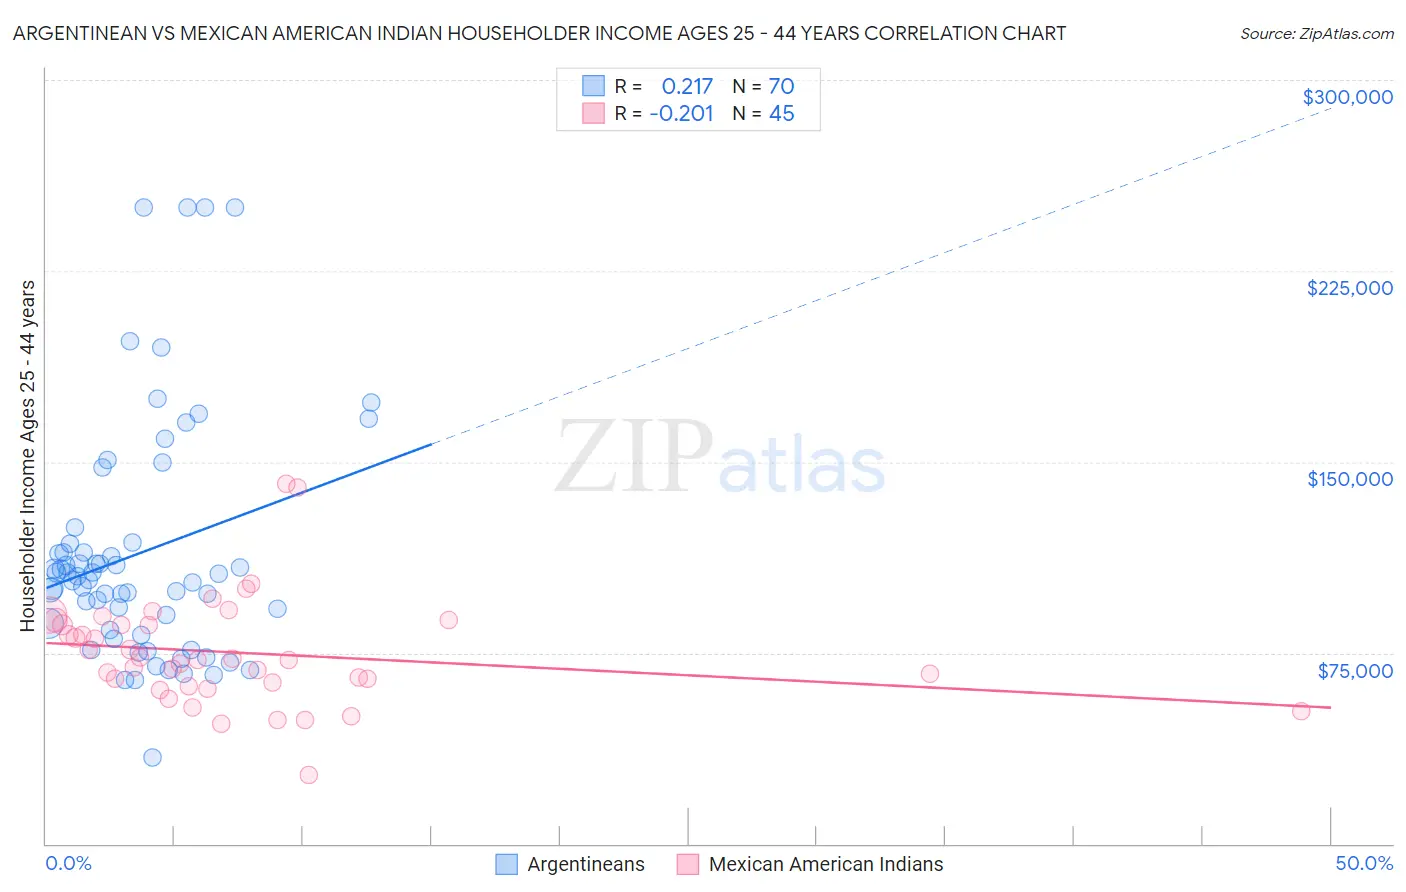 Argentinean vs Mexican American Indian Householder Income Ages 25 - 44 years